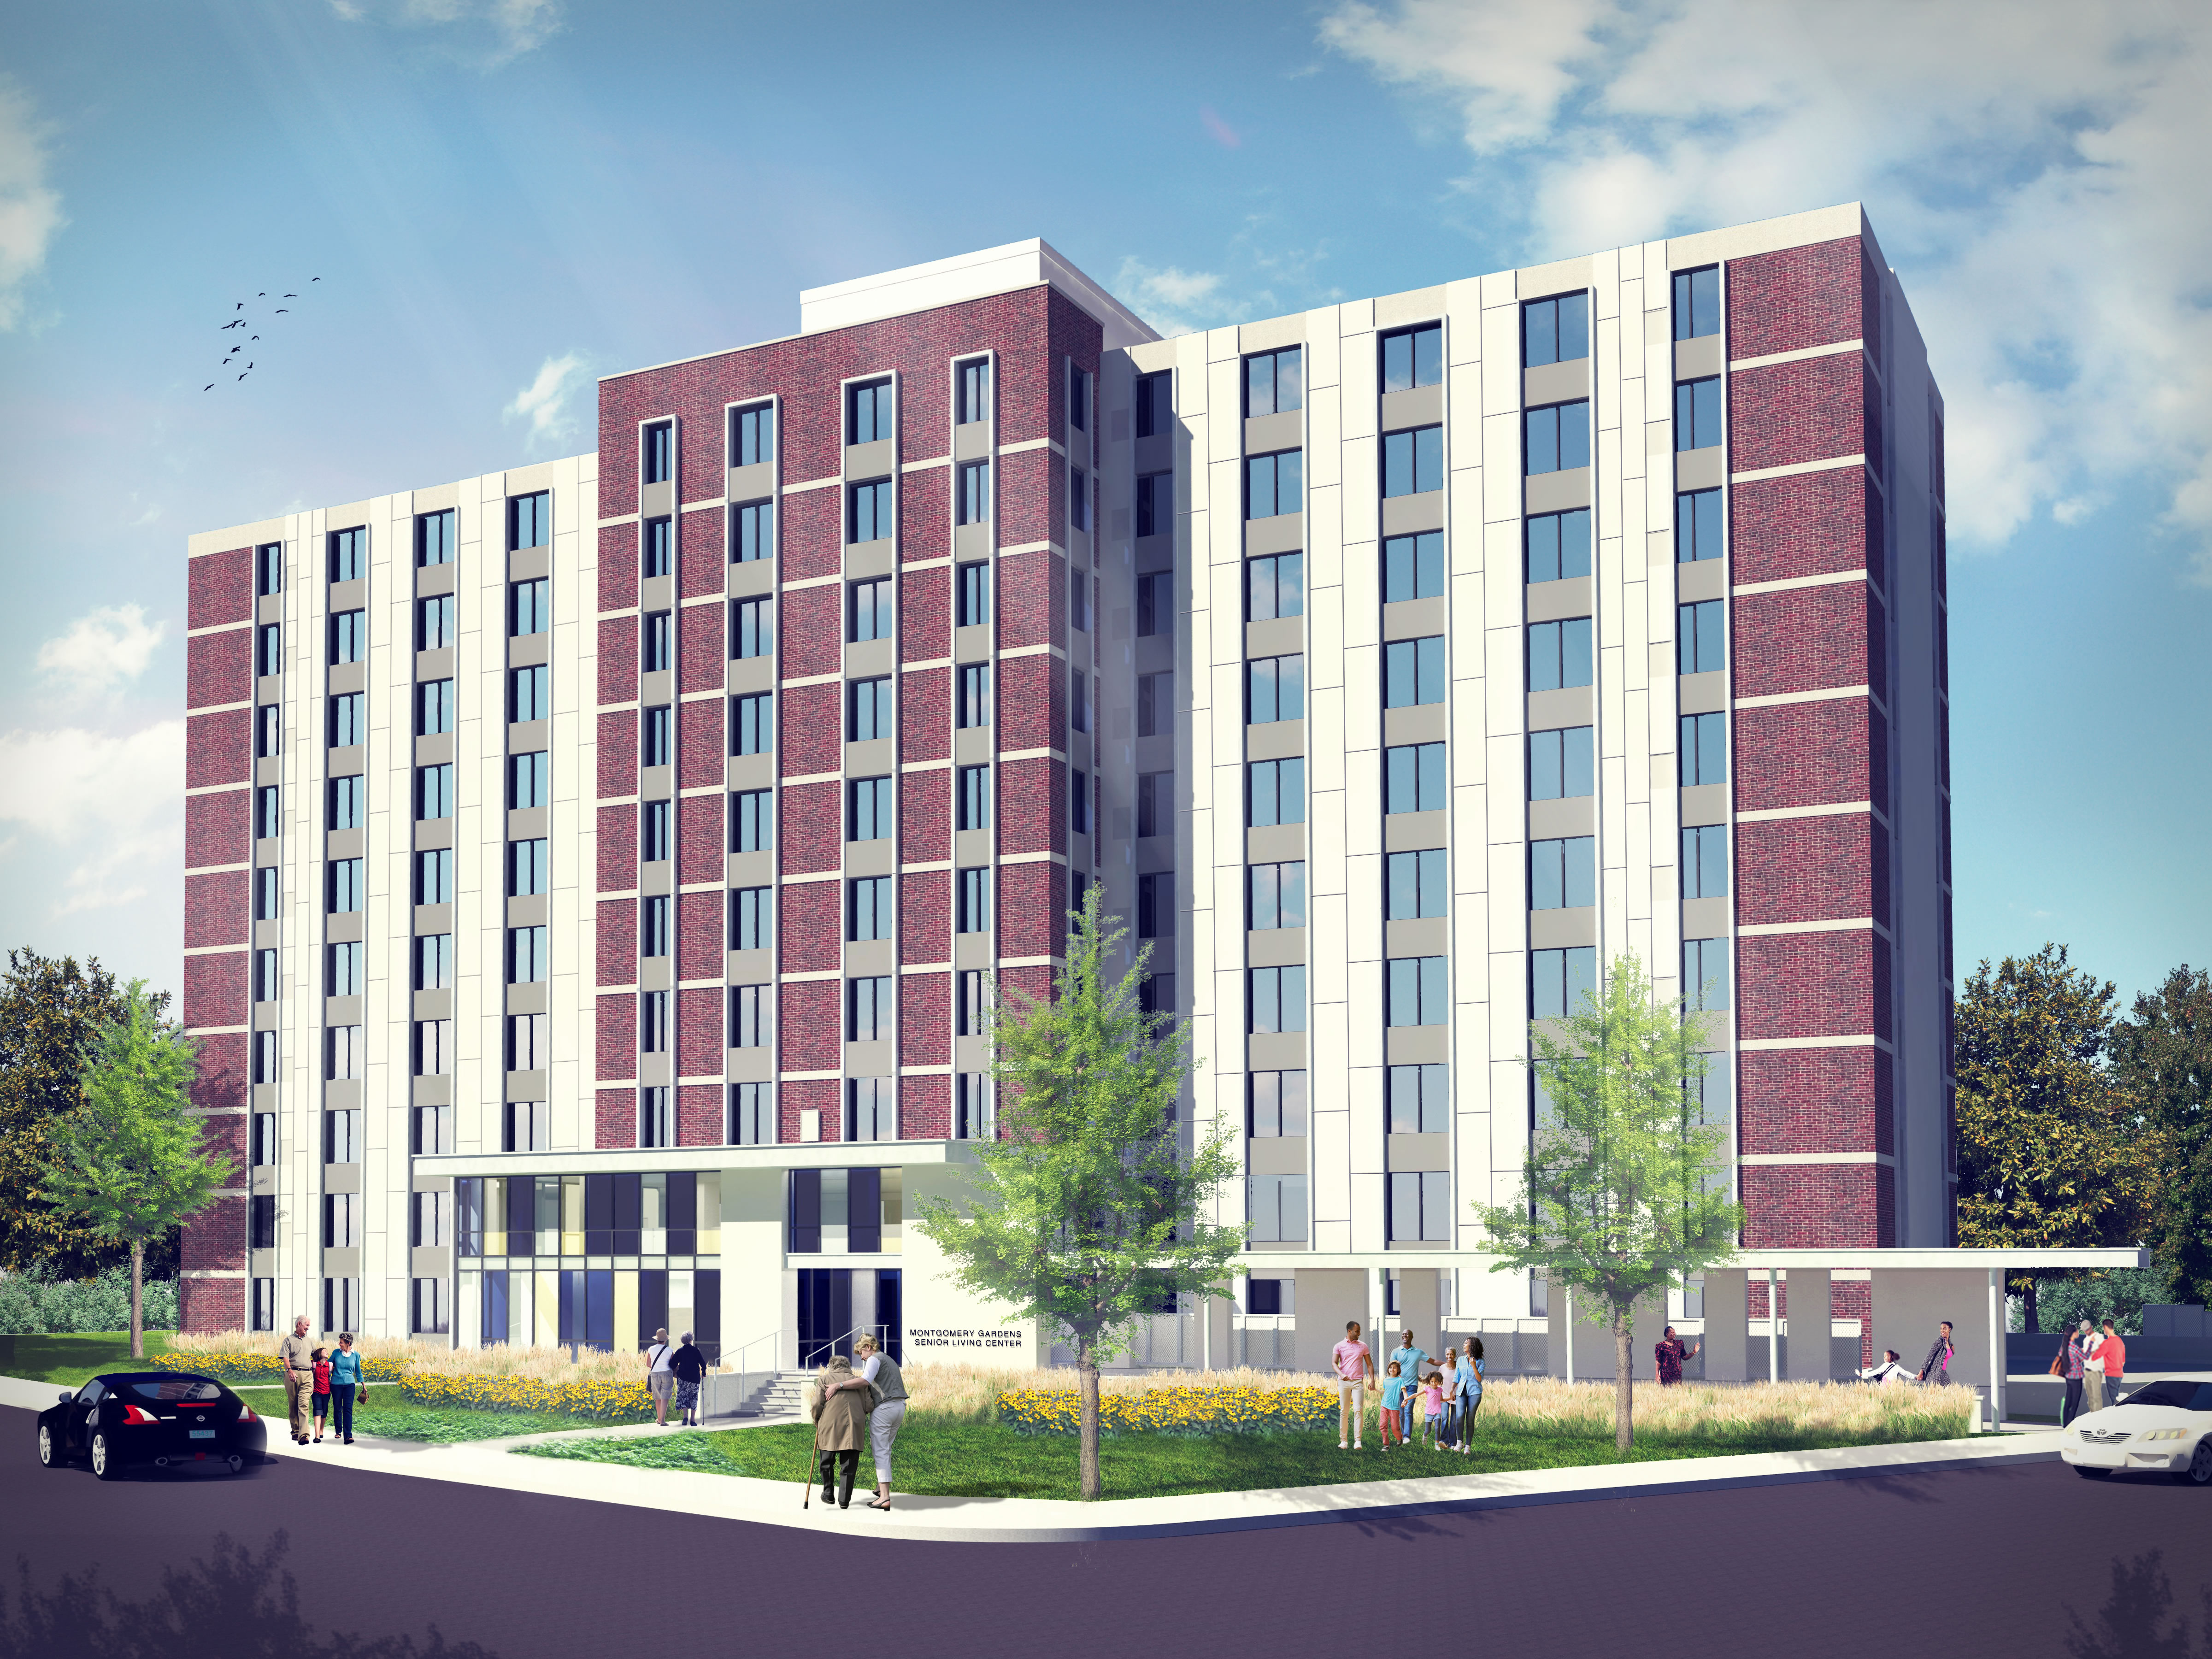 Groundbreaking Marks The Commencement Of The Jersey City Housing